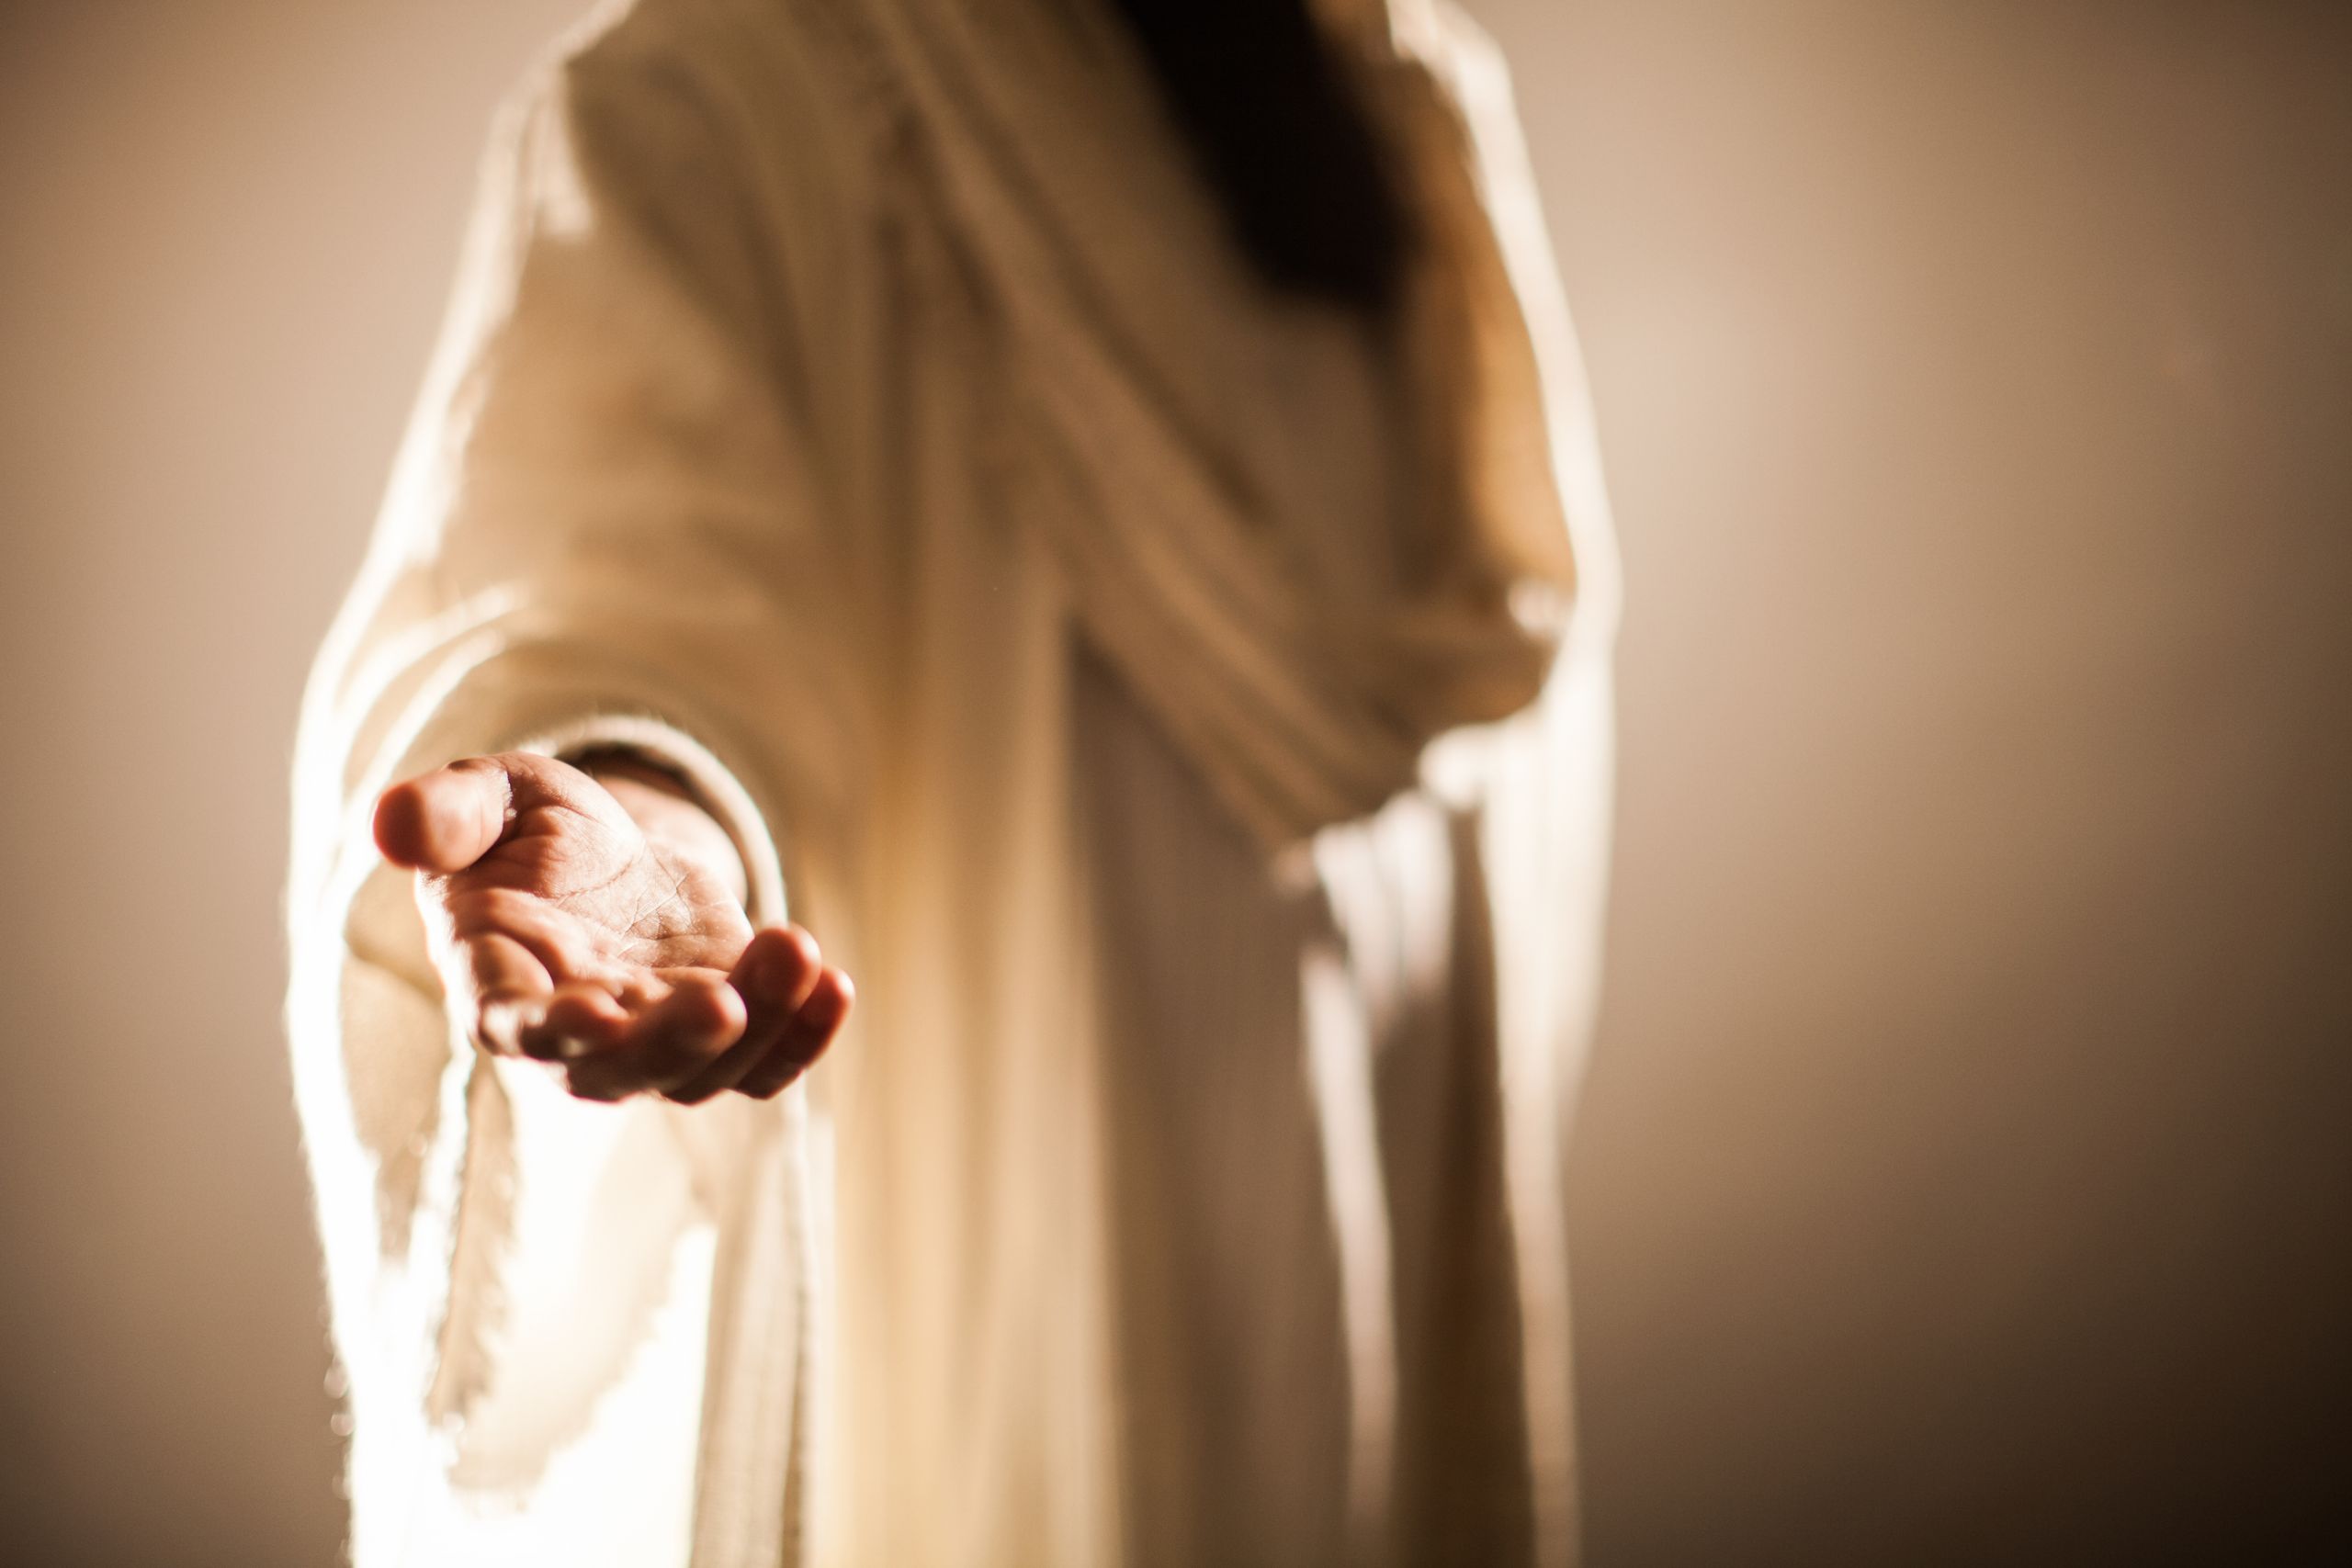 Jesus is dressed in a white robe extending His hand out towards you